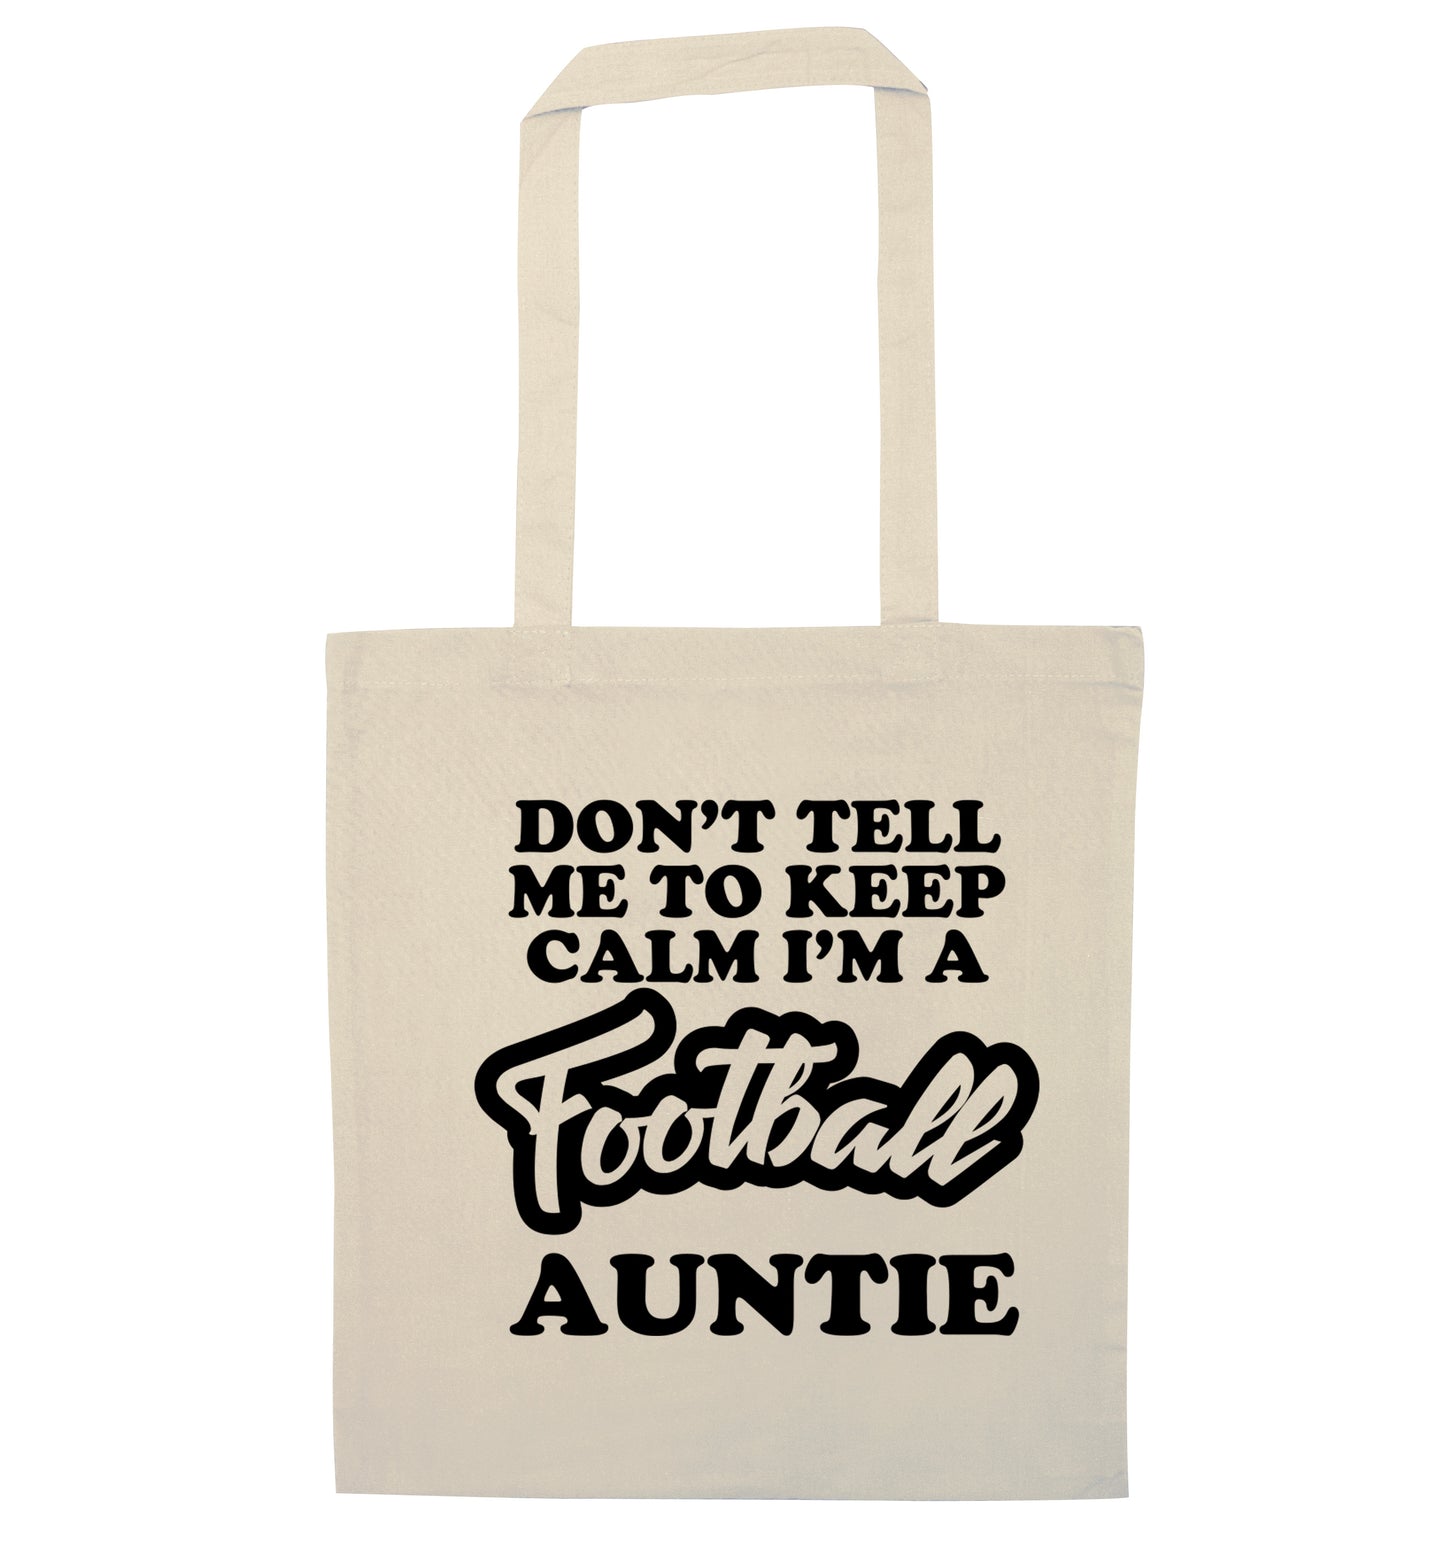 Don't tell me to keep calm I'm a football auntie natural tote bag